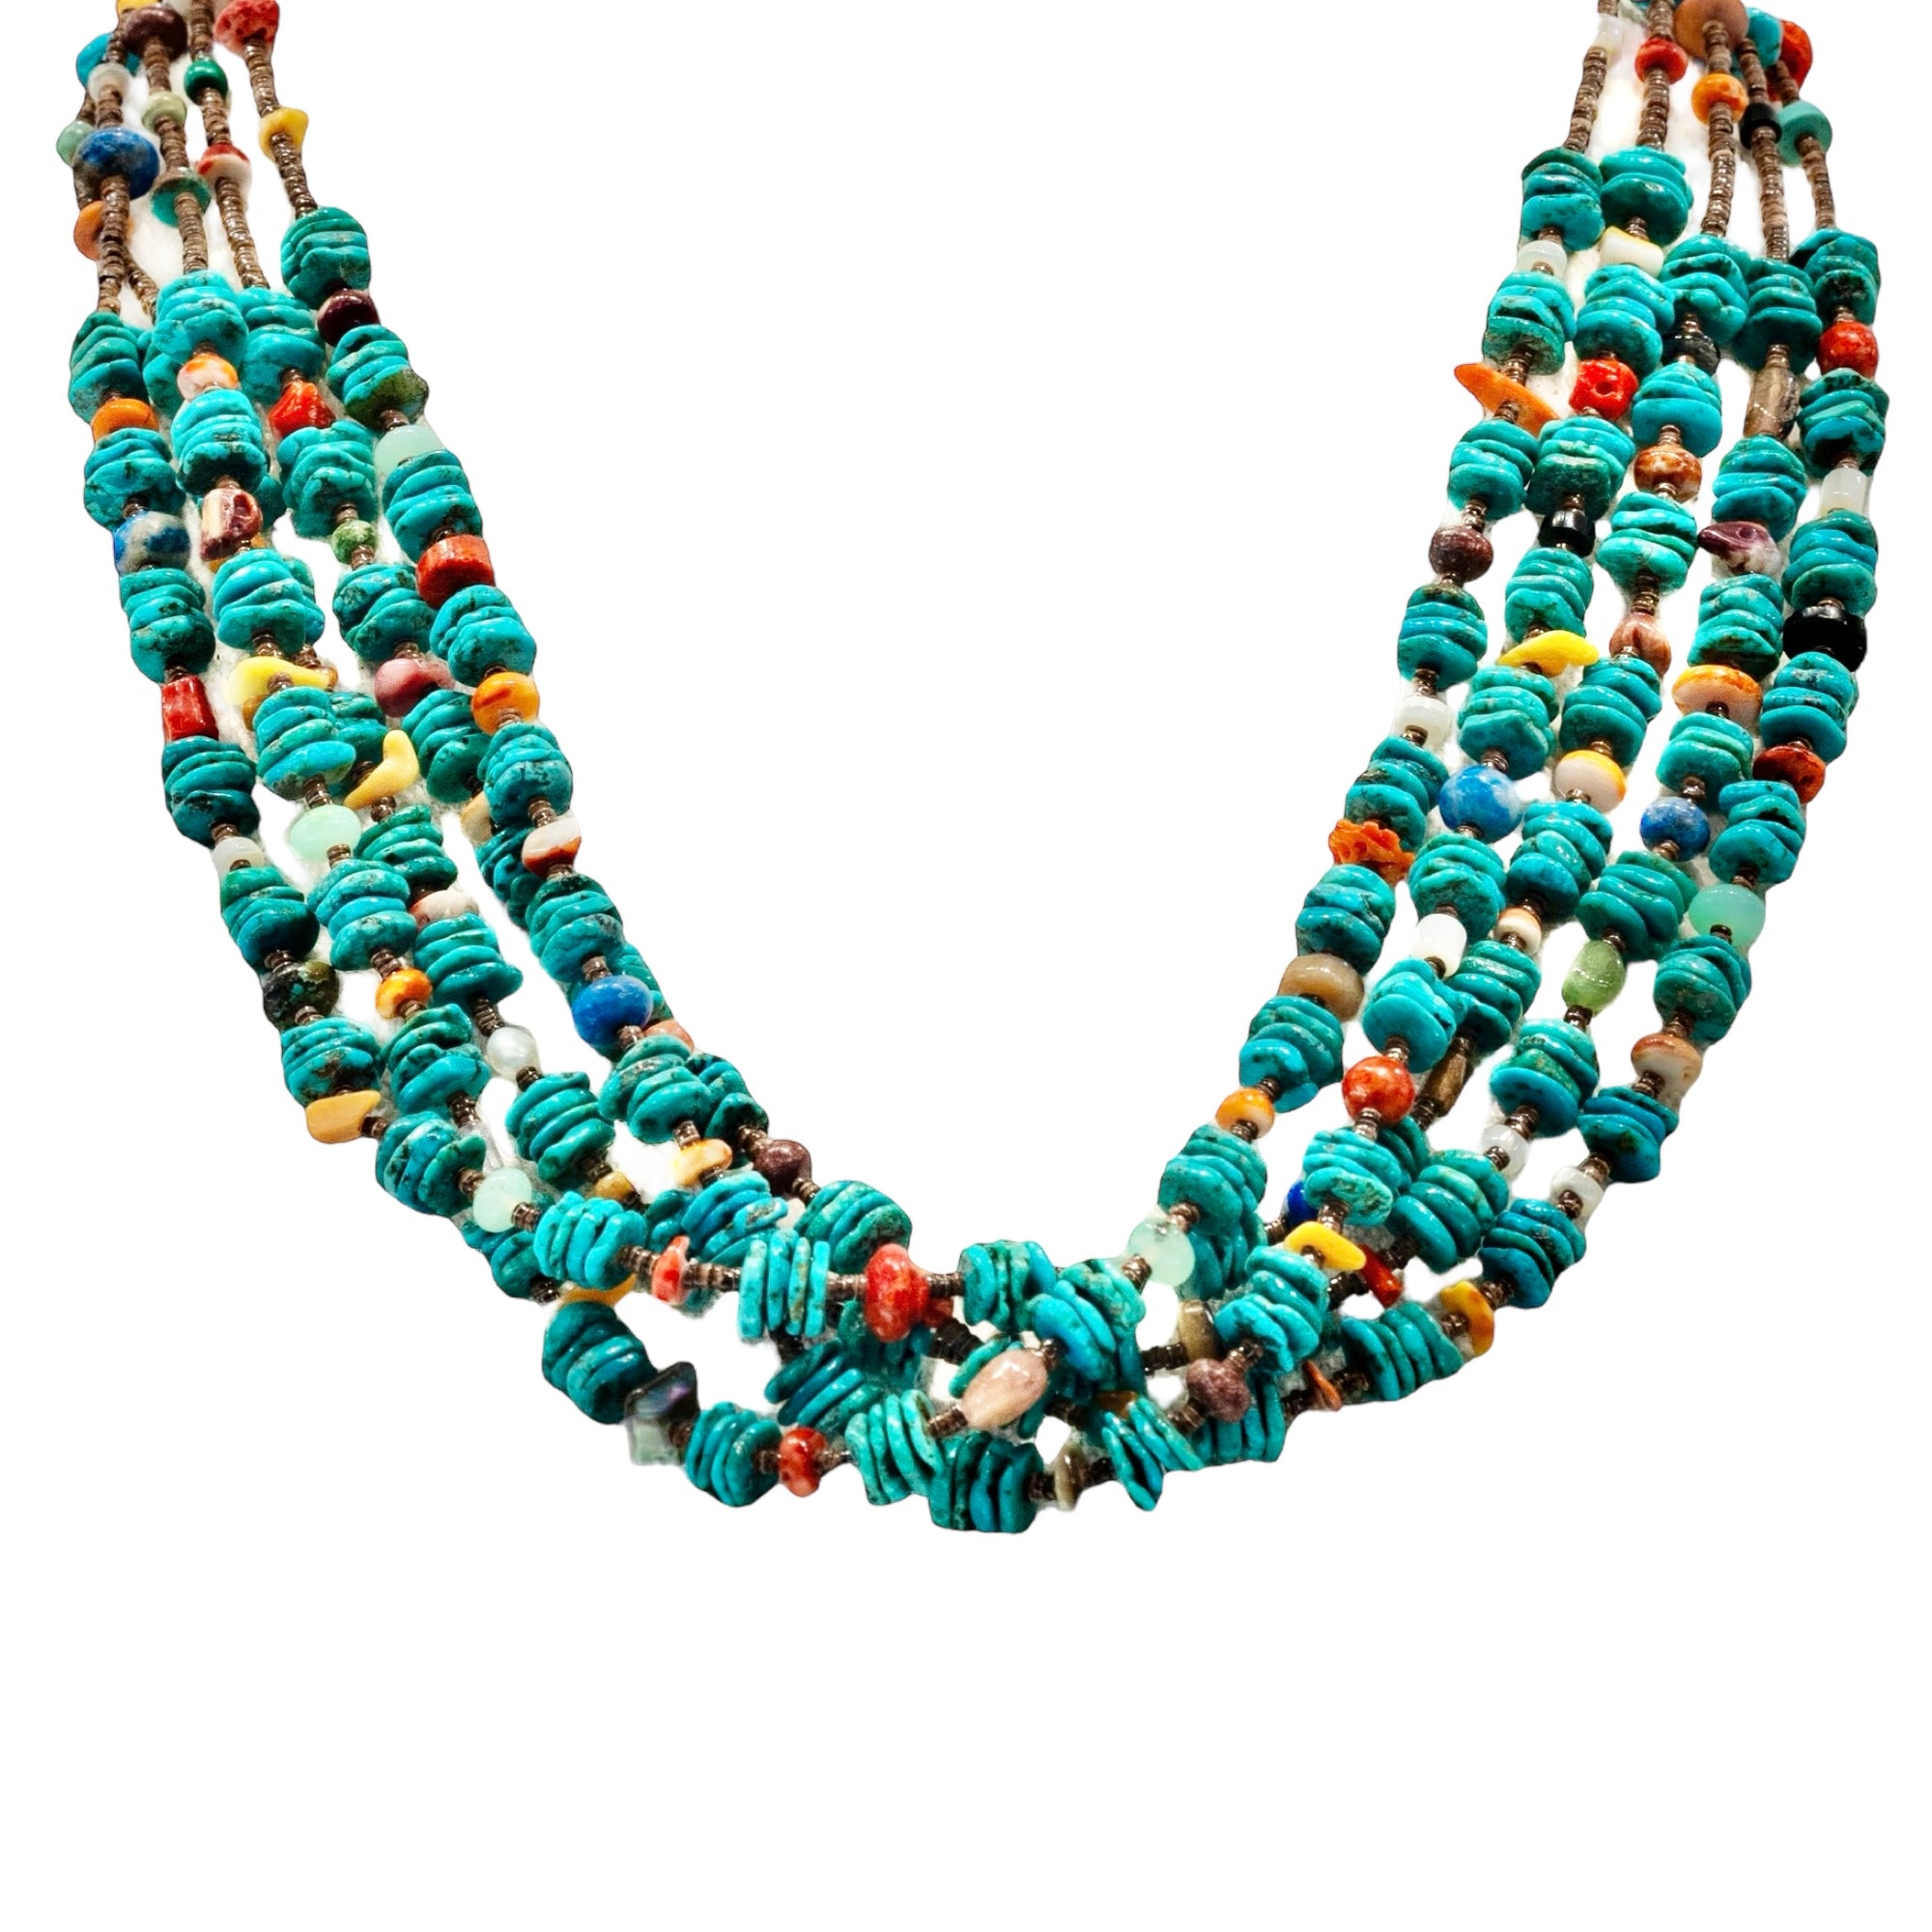 Native American 5 Strand Turquoise Nugget Necklace available at Talisman Collection Fine Jewelers in El Dorado Hills, CA and online.This exquisite 5 strand 20” necklace is an authentic Native American piece. It features beautiful and natural flat Tibetan turquoise nuggets, along with Tibetan turquoise cones, baby chocolate olivela heishi shells, lapis, freshwater pearl, coral, mother of pearl shell, adventurine, abalone shell, and chrysocolla.